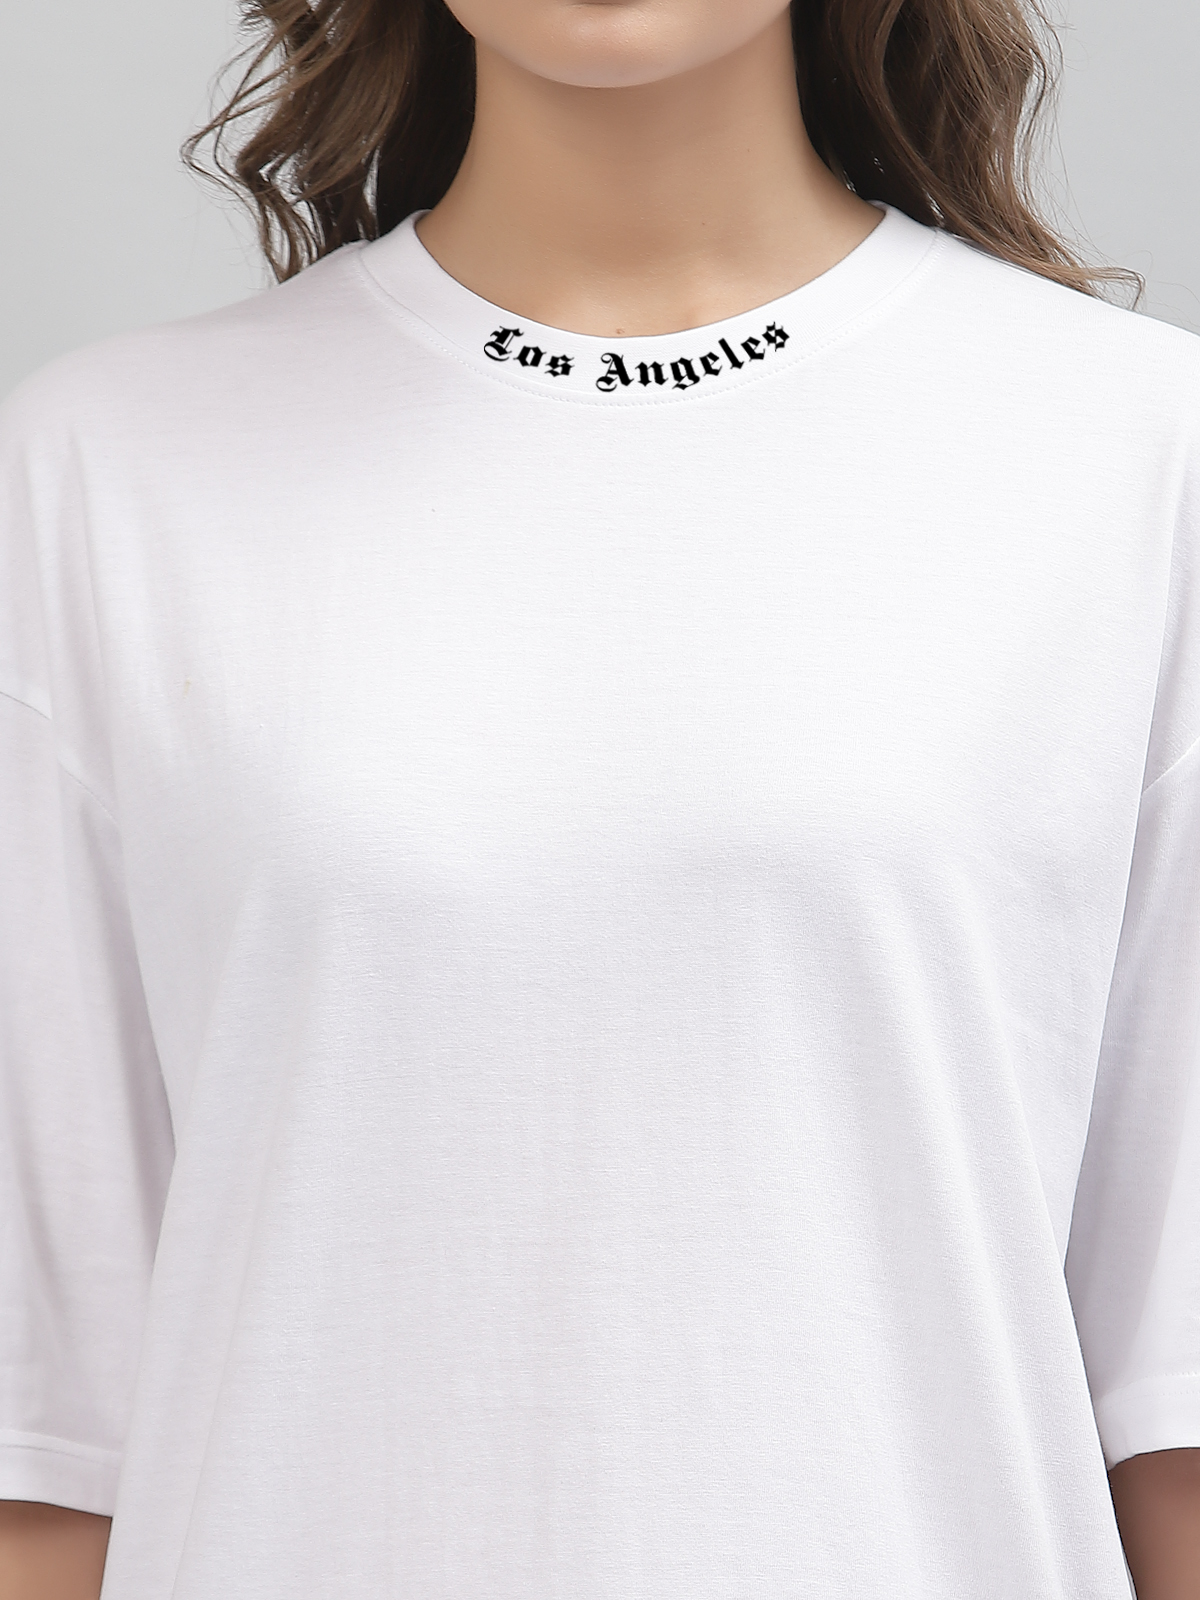 Los Angels White Drop-shoulder Oversized Tee for Women